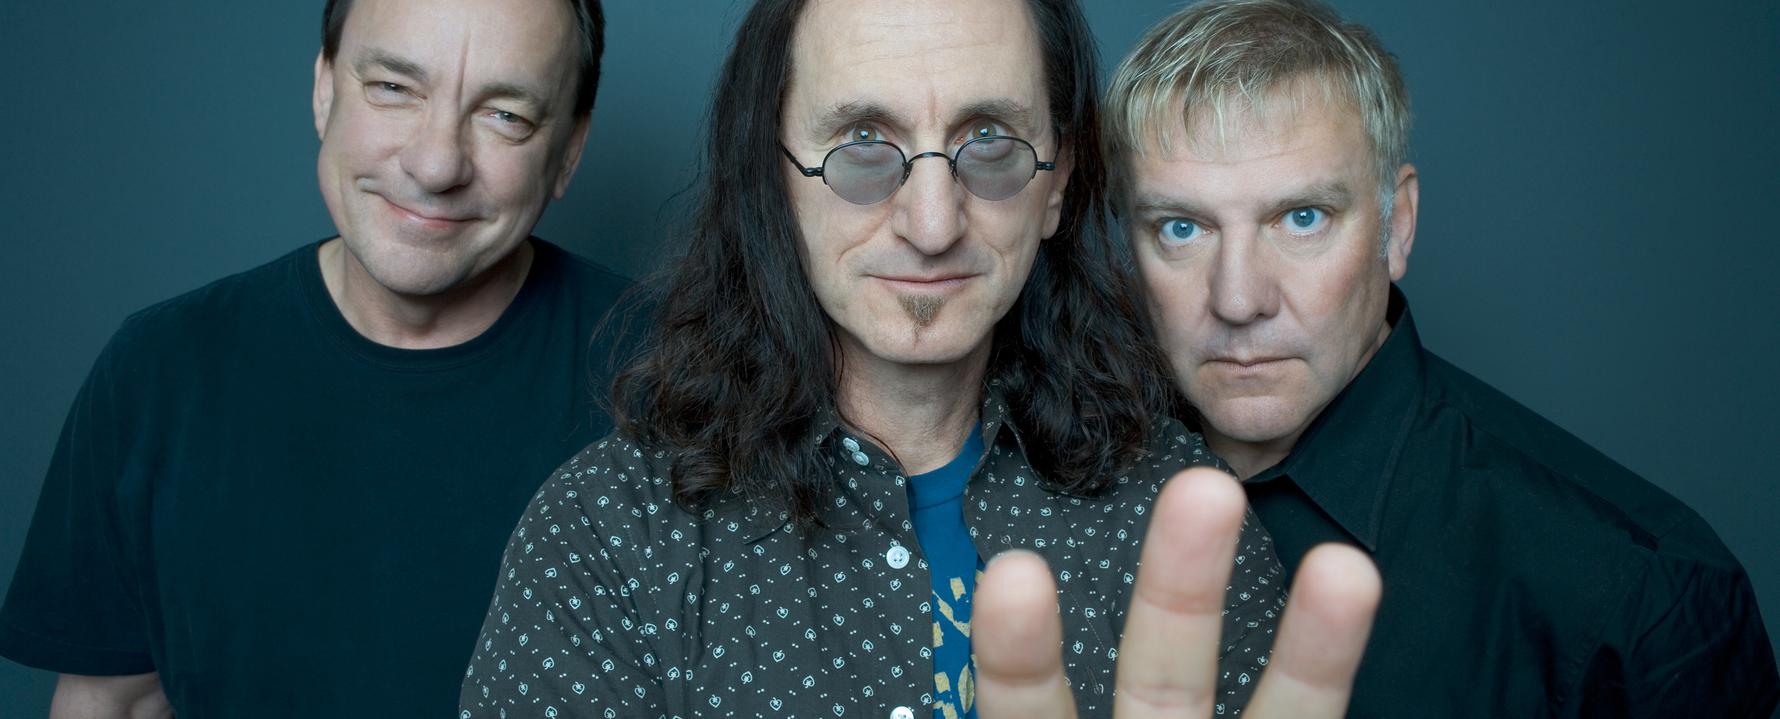 Promotional photograph of Rush.